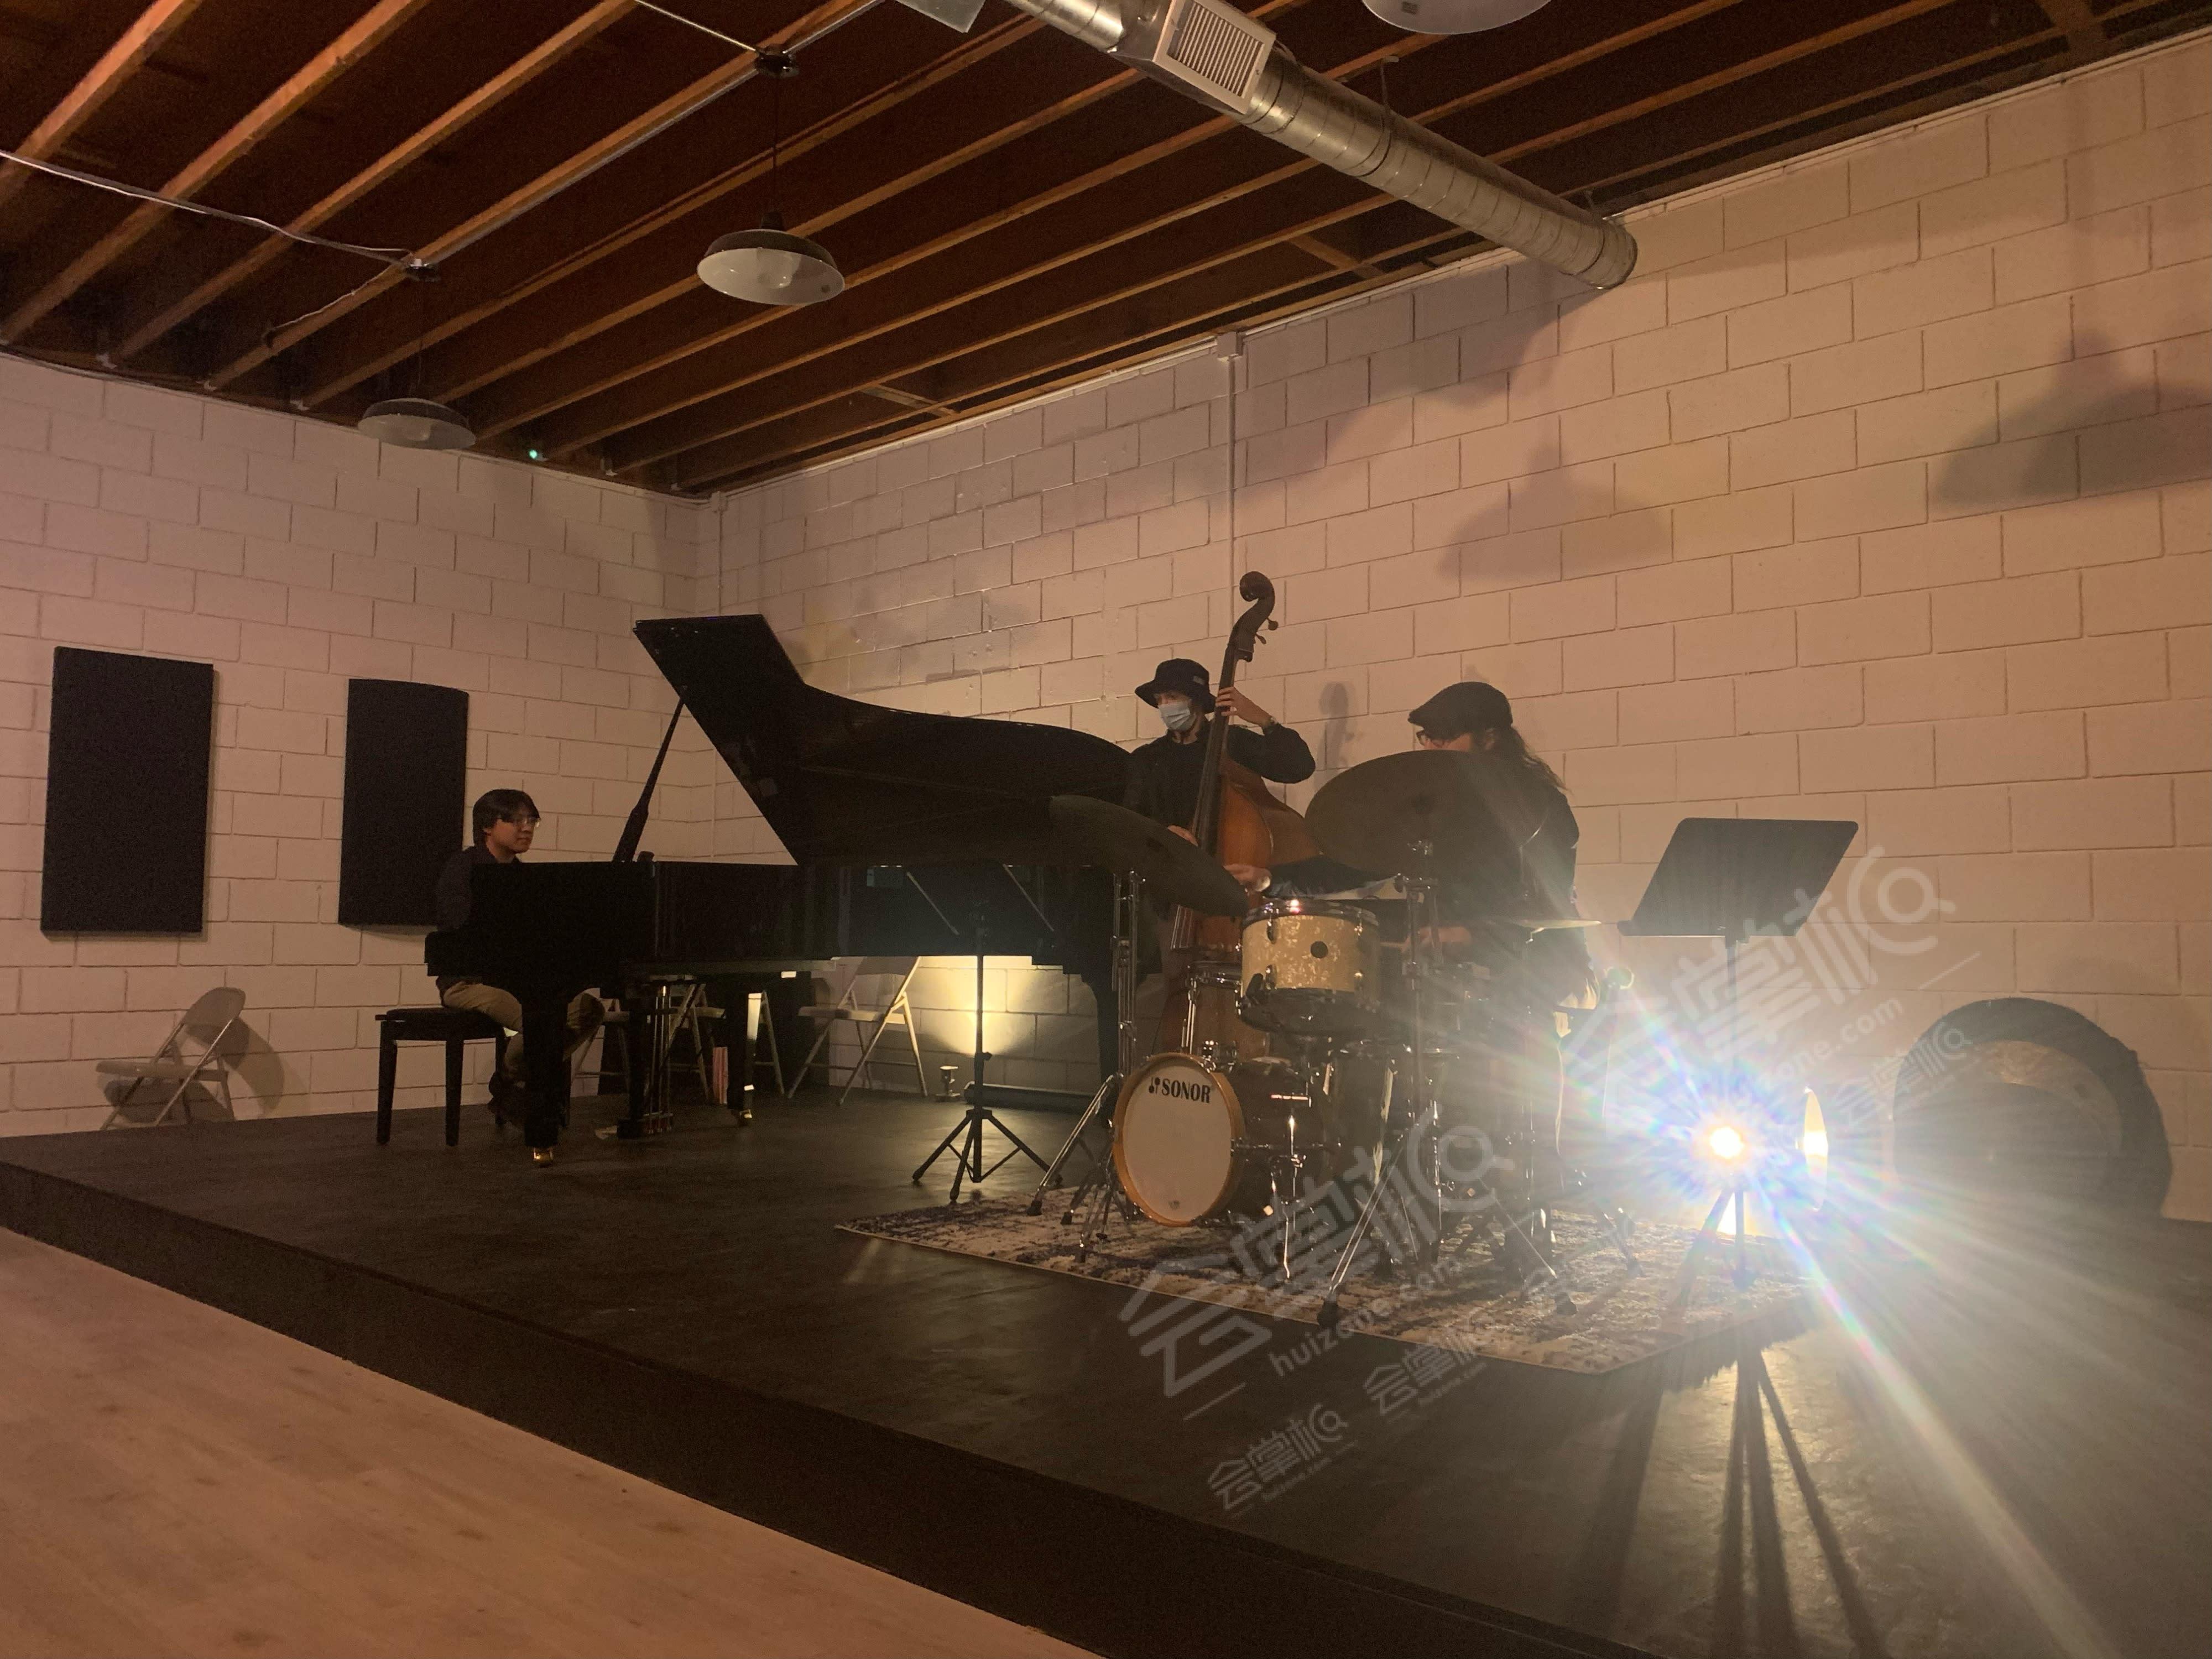 Music recital, live performance, presentation, rehearsal space, musical theatre